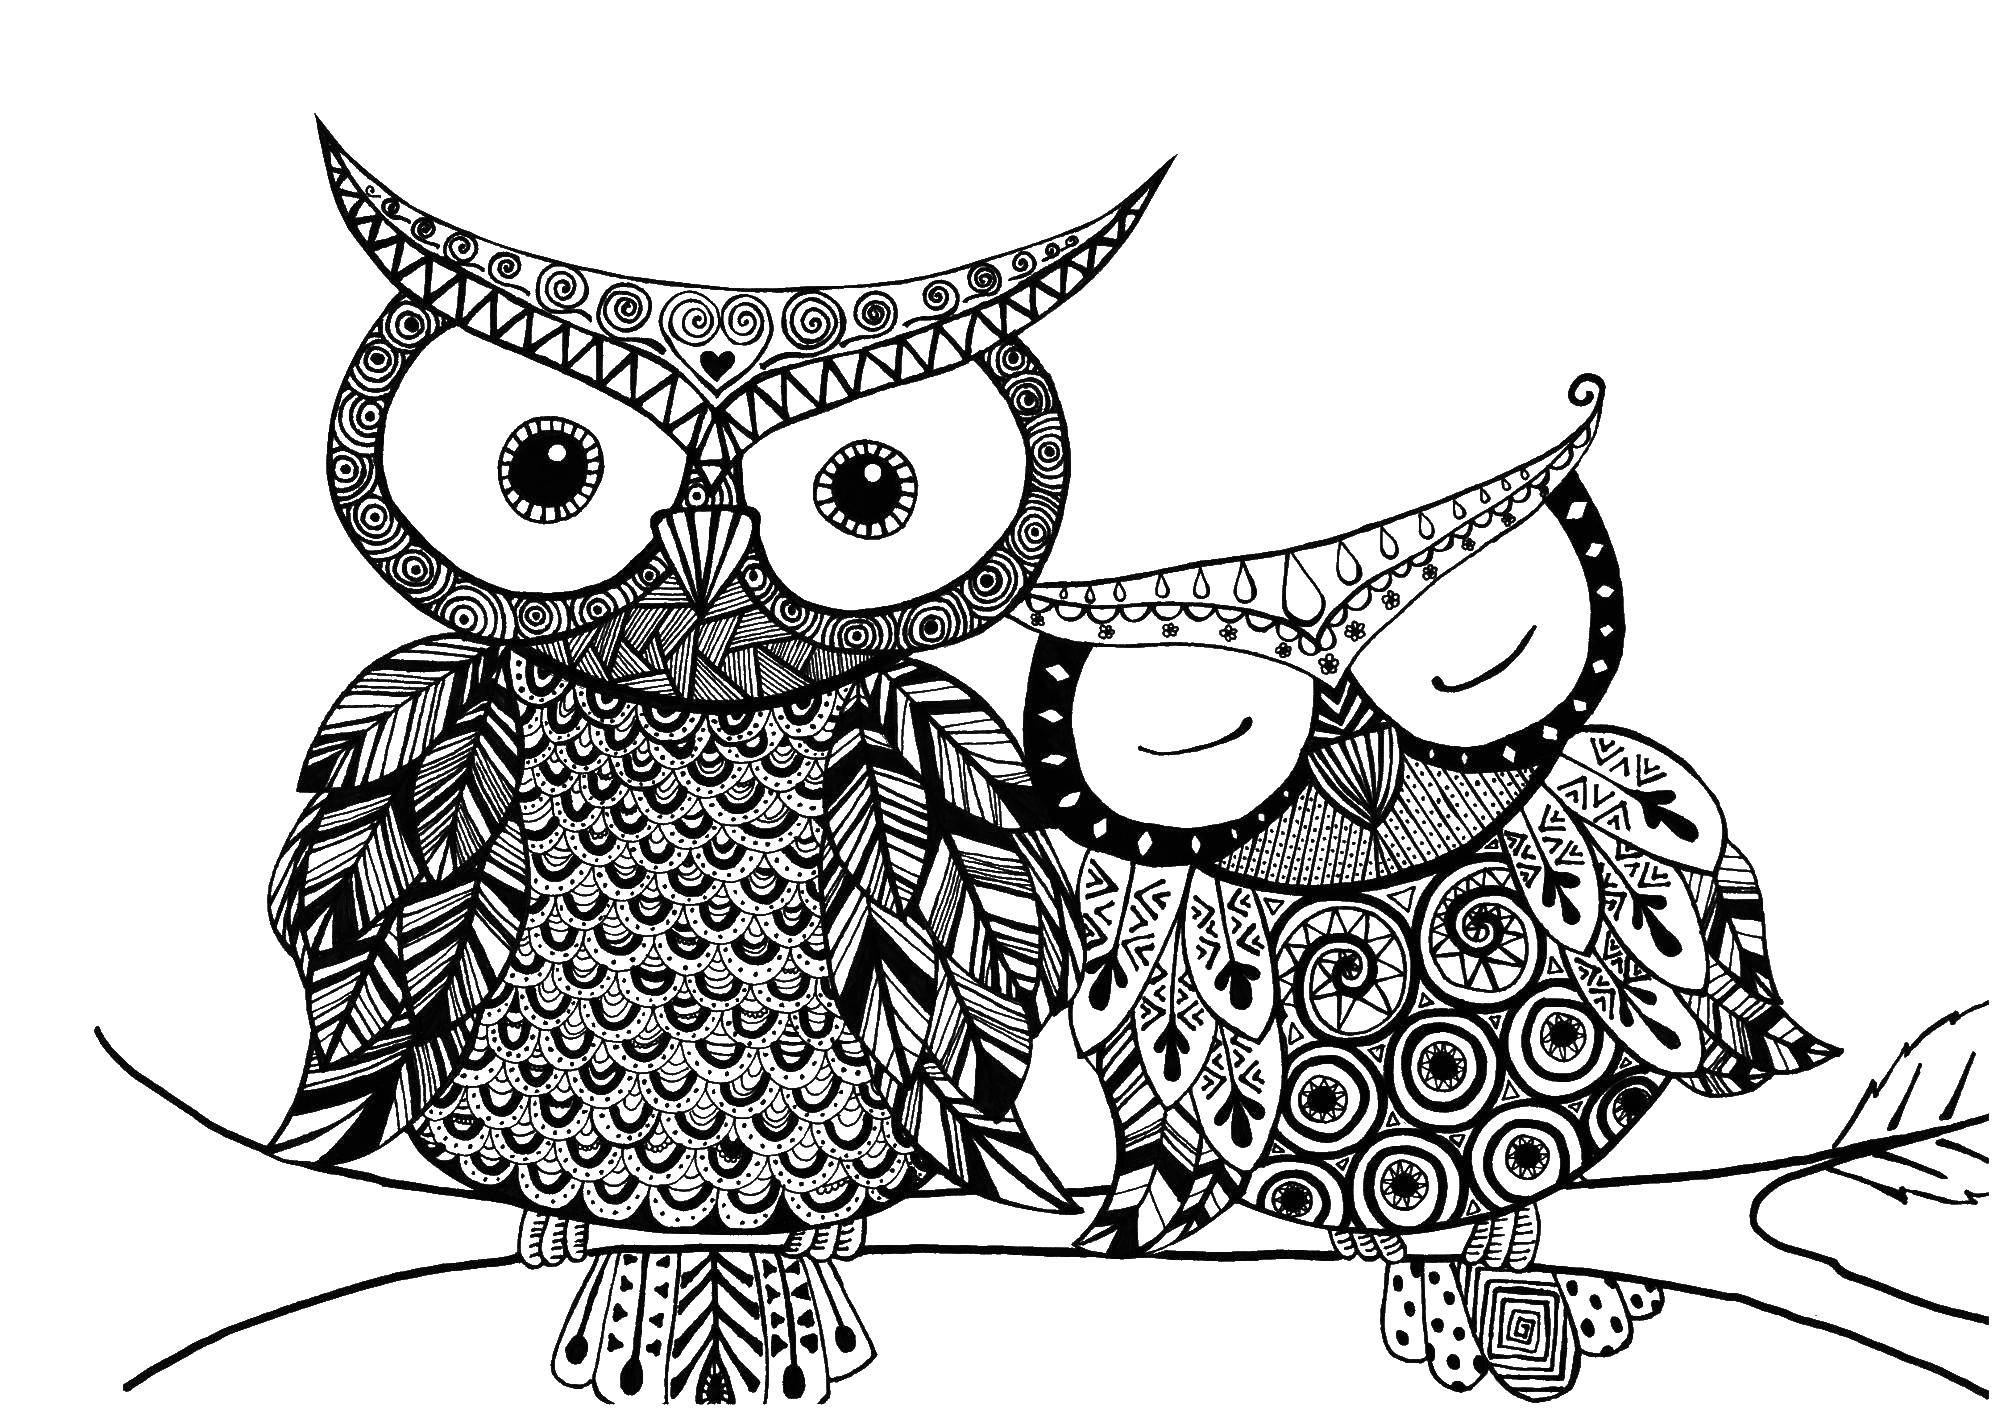 Coloring Ethnic owl. Category patterns. Tags:  Patterns, animals.